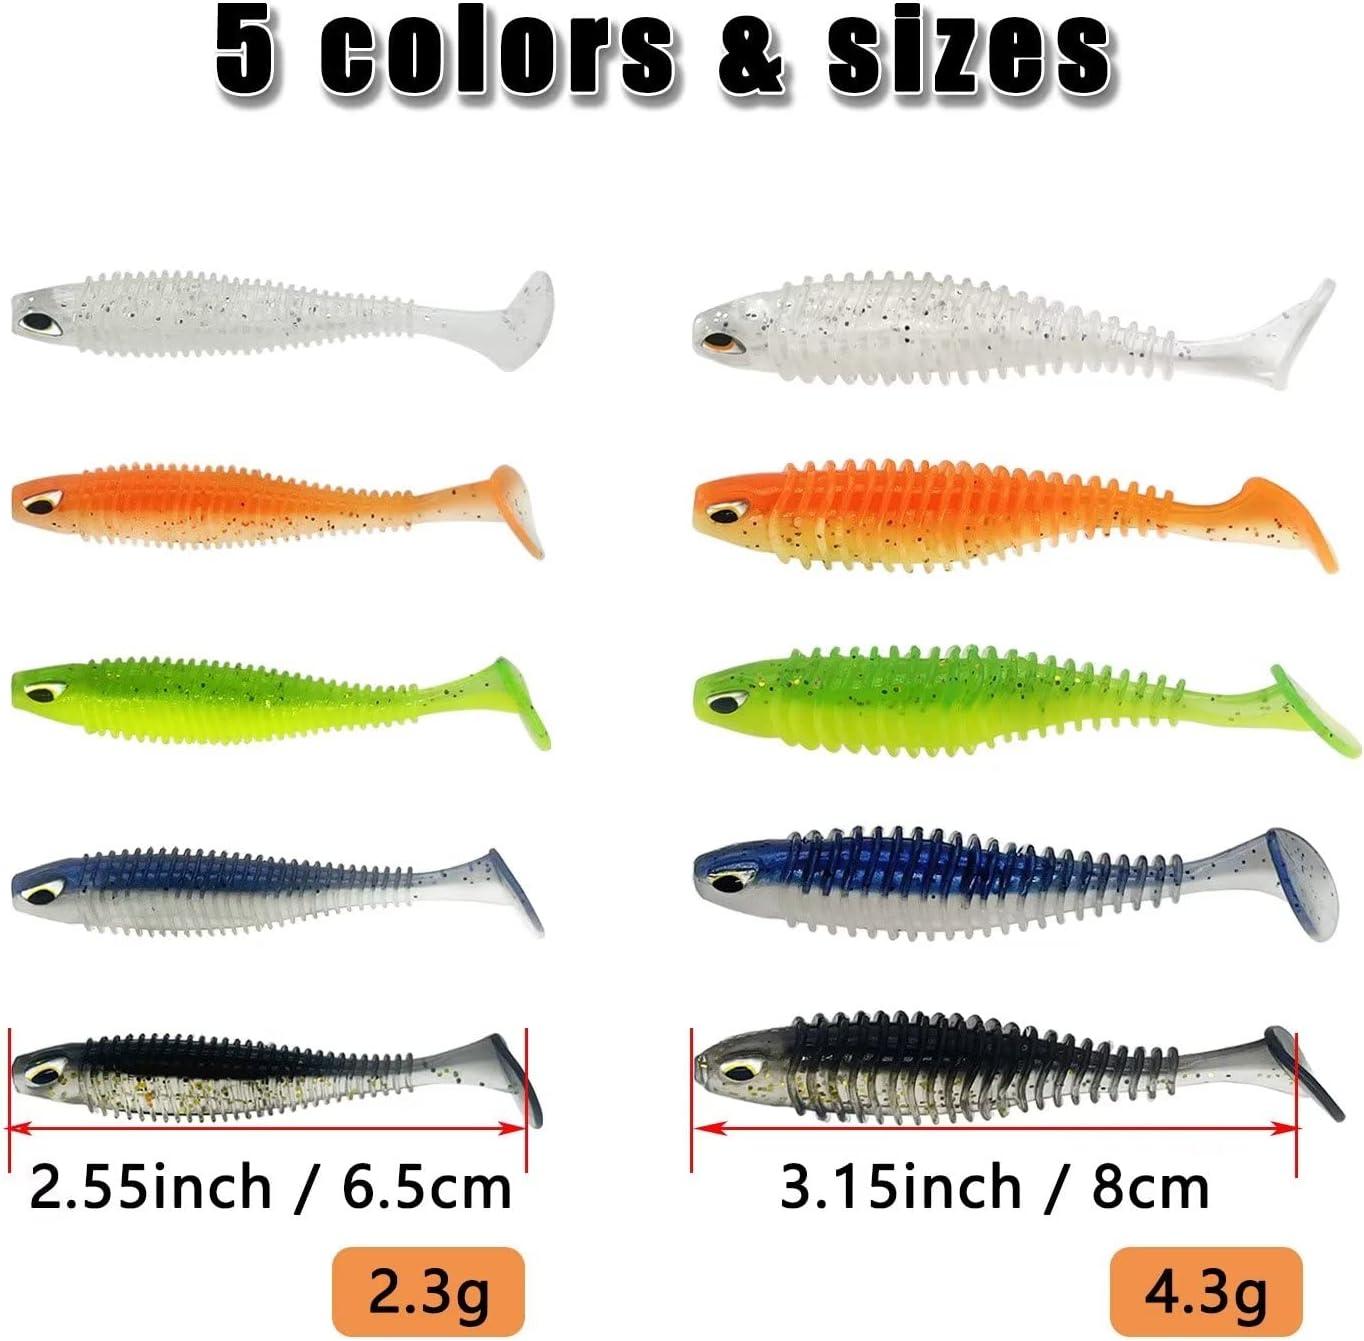  Mednkoku Soft Plastic Baits 30PCS 3.15 in Paddle Tail Swim Bait  Realistic Fishing Lures Waterproof Reusable Soft Swimbaits Kit Soft Lures :  Sports & Outdoors